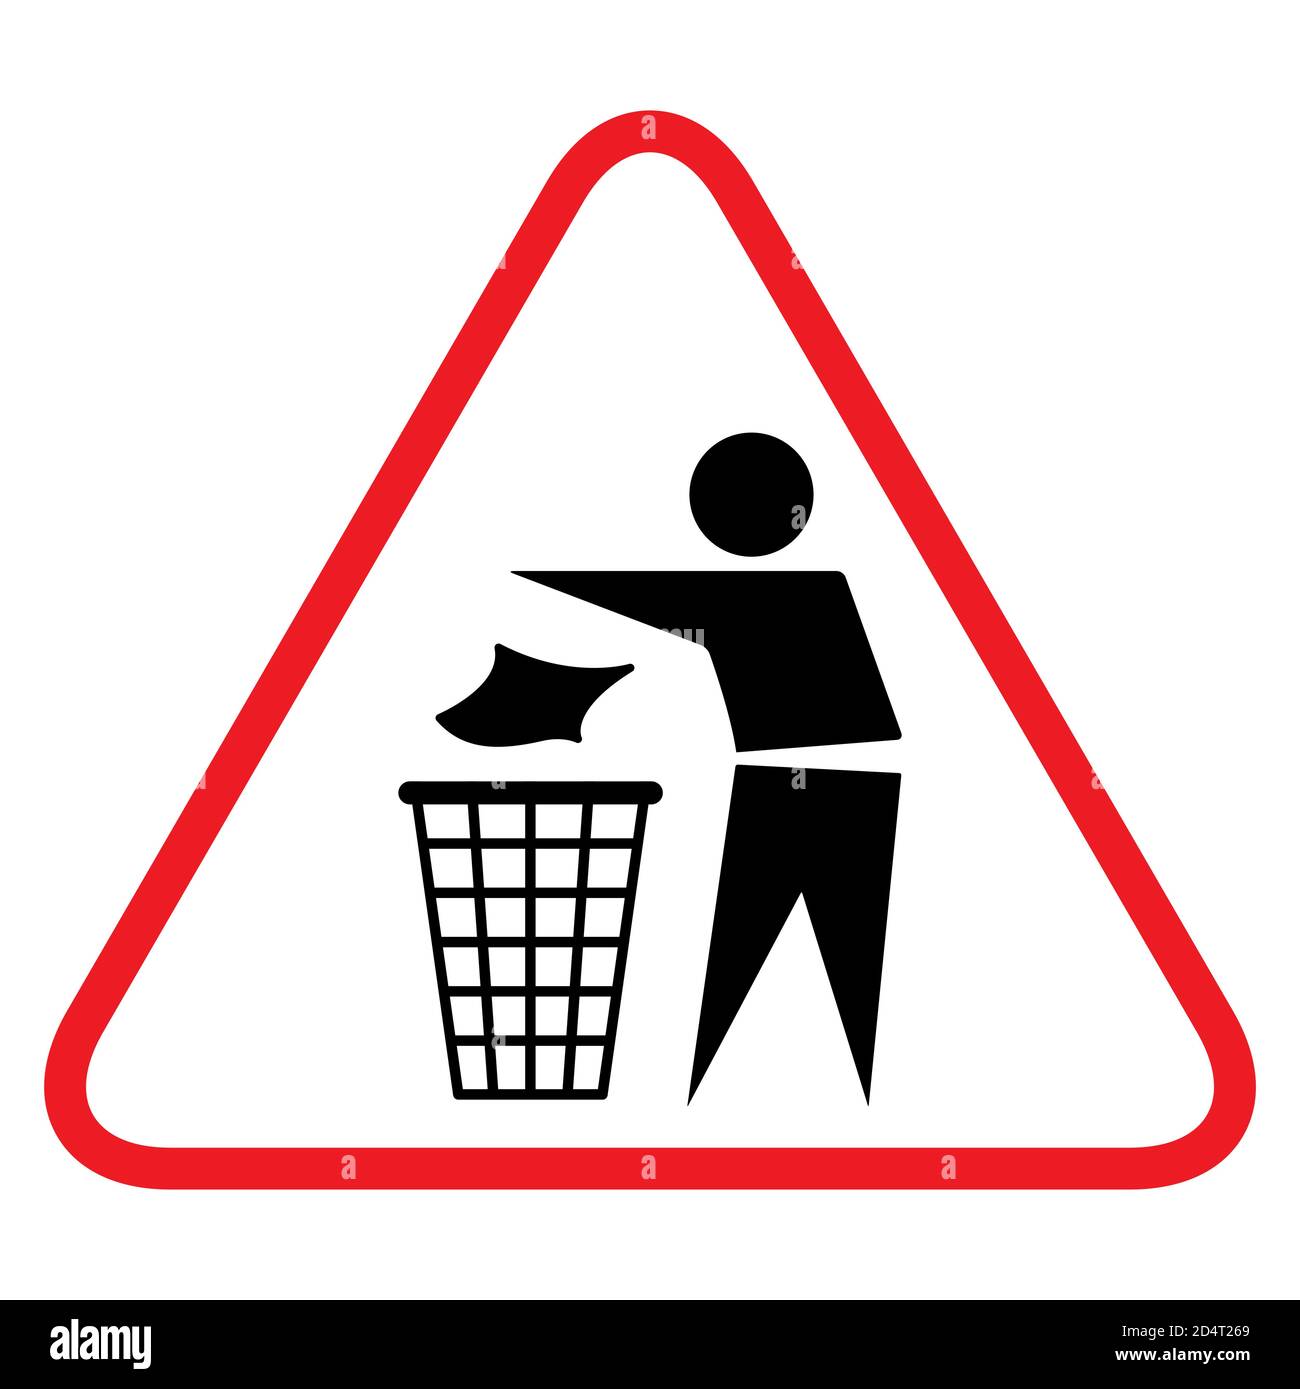 Do not litter flat icon in red triangle isolated on white background. Keep it clean vector illustration. Tidy symbol . Stock Vector